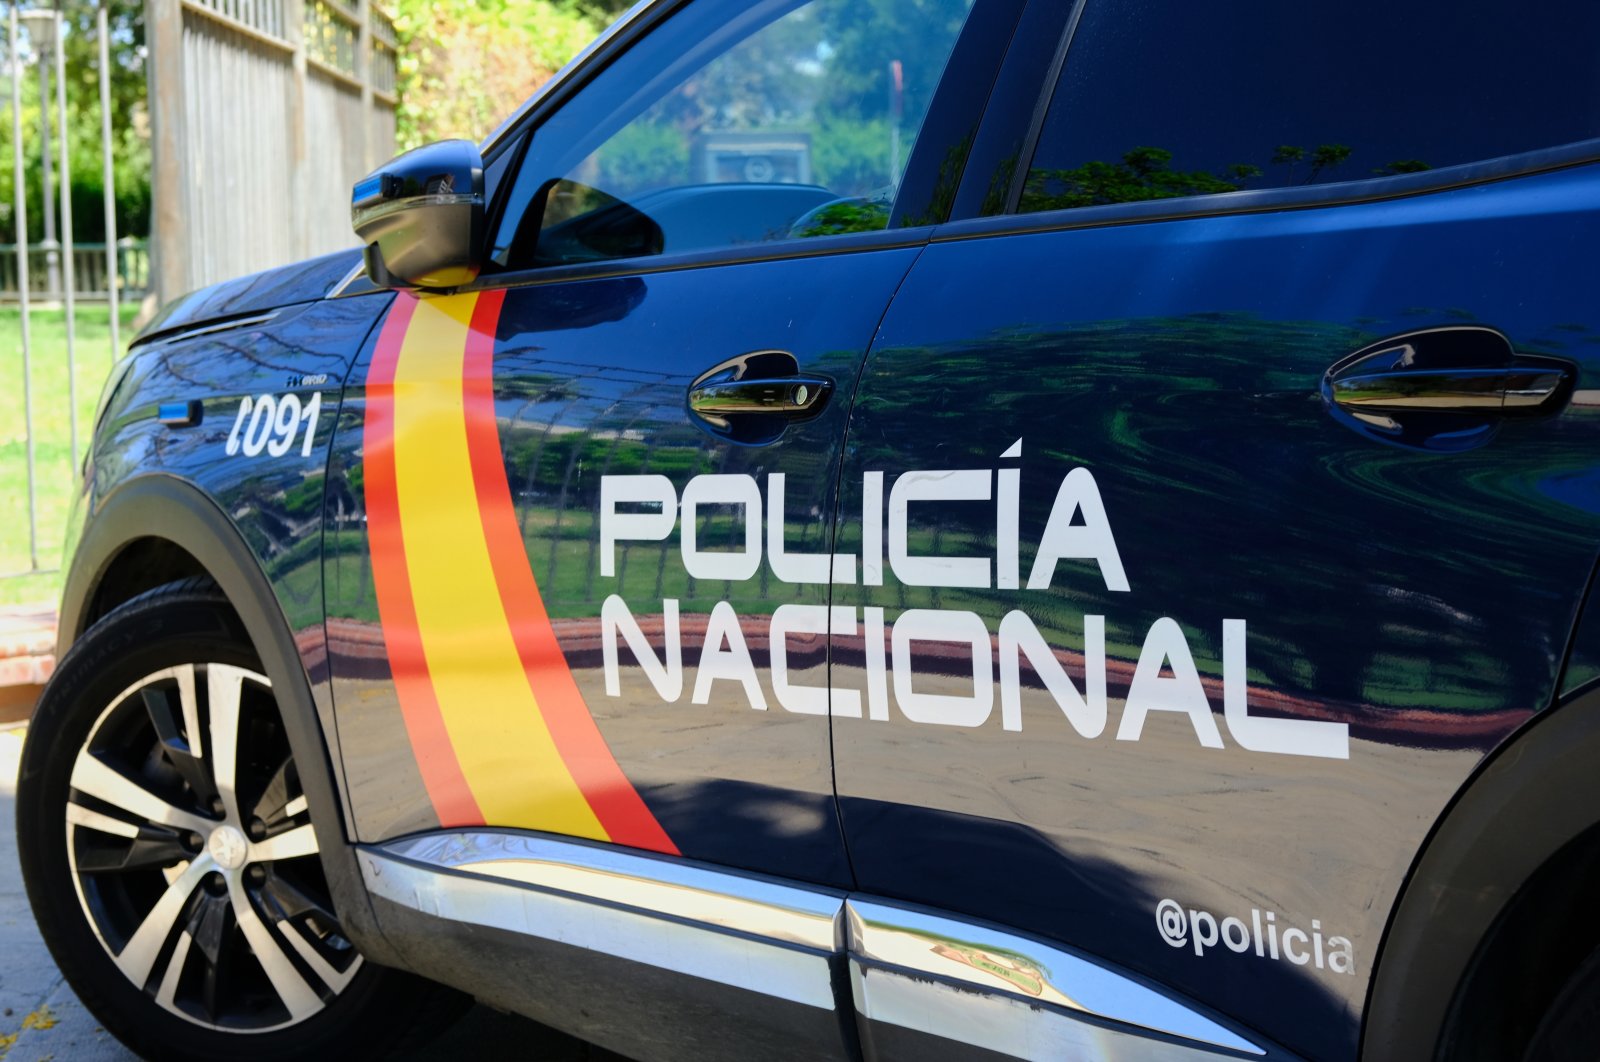 A vehicle of the Policia Nacional (Spanish national police) on patrol in Sevilla, Spain, June 5, 2022. (ShutterStock Photo)